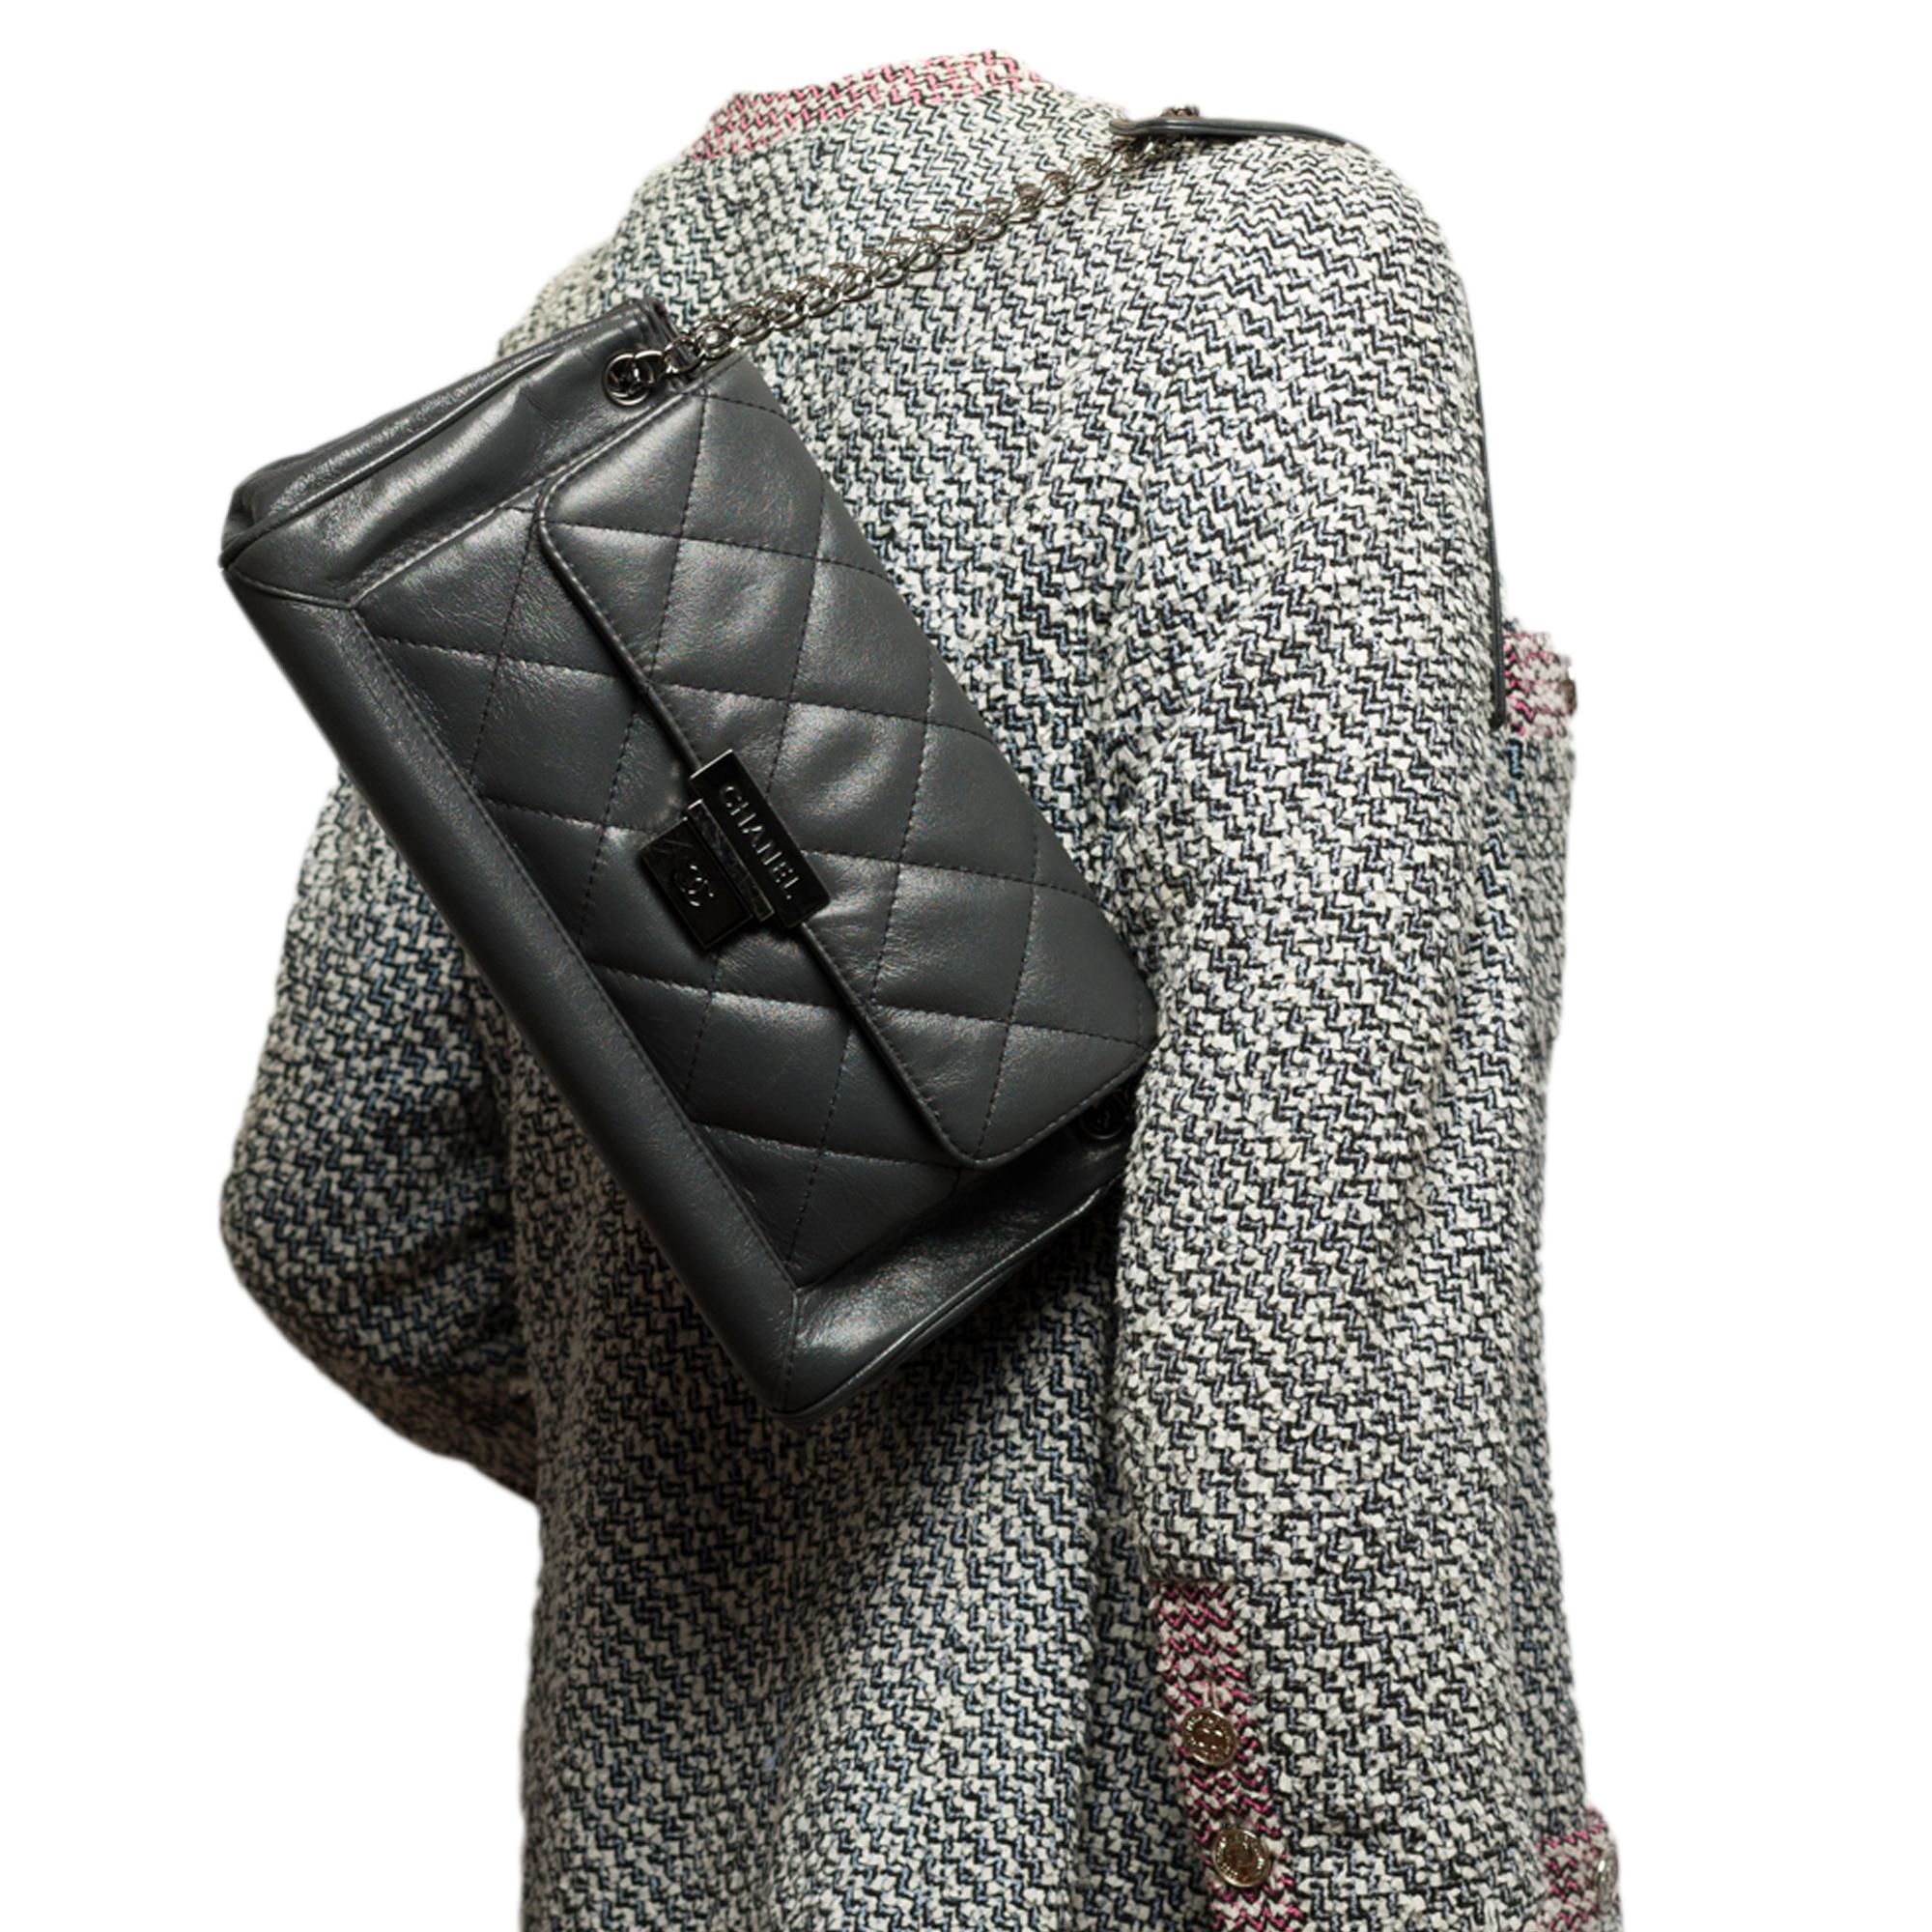 Chanel Classic Flap shoulder bag in grey quilted leather, SHW 4